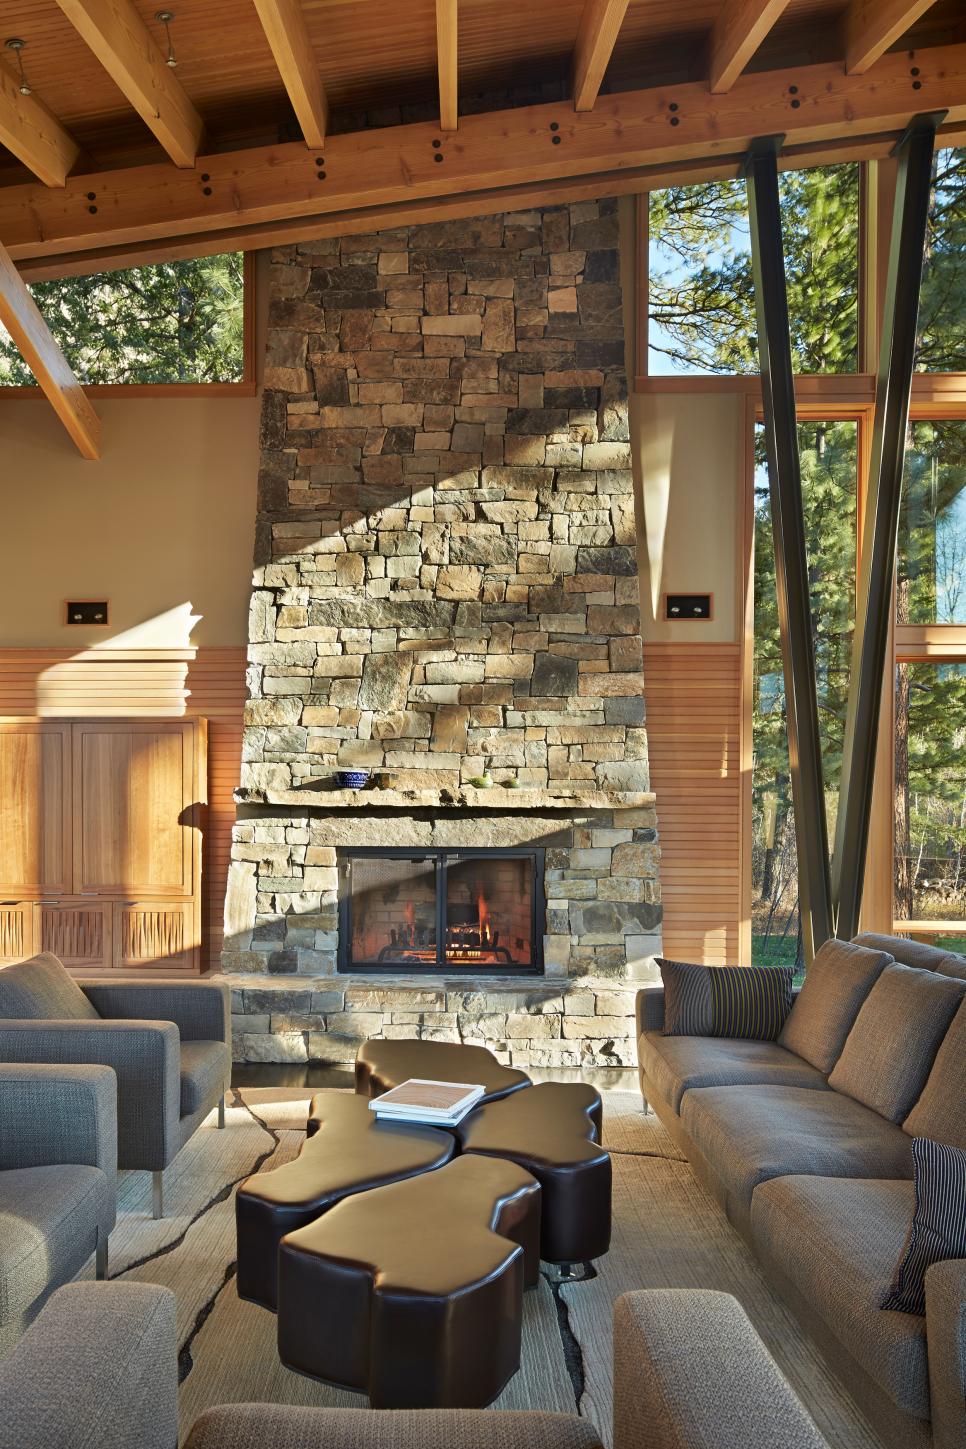 Modern, Rustic Living Room Features Stacked Stone